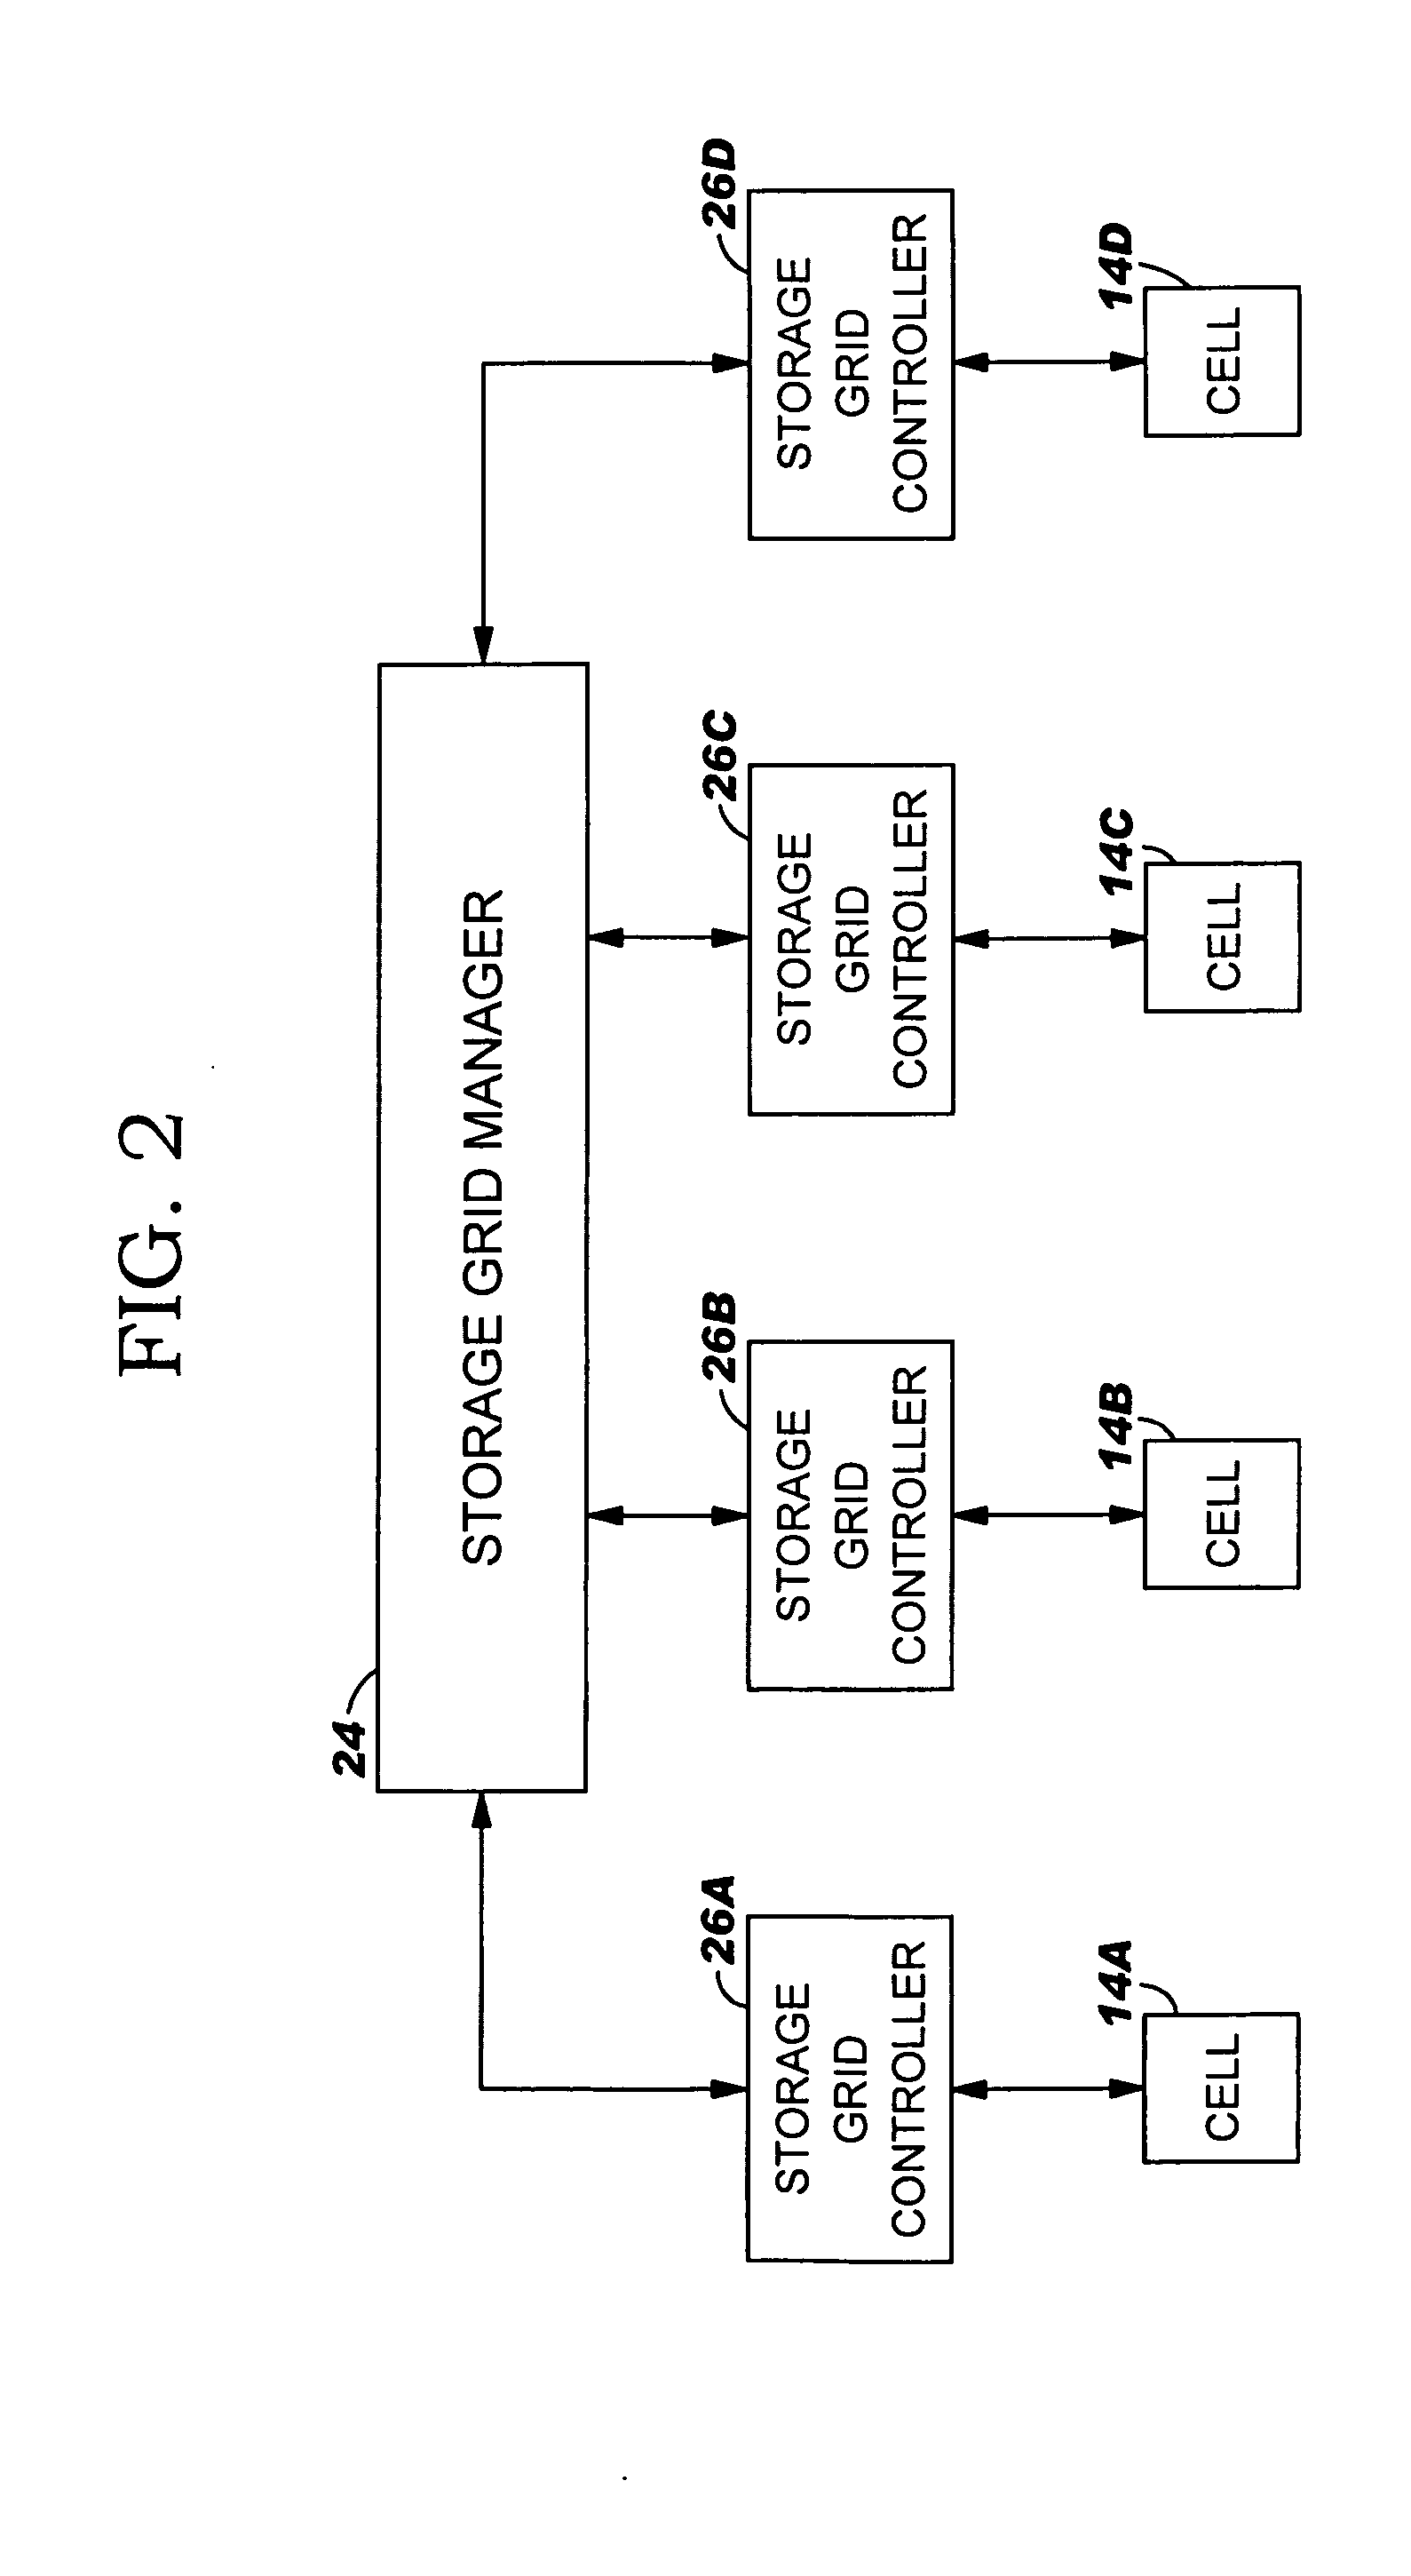 Computerized system, method and program product for managing an enterprise storage system